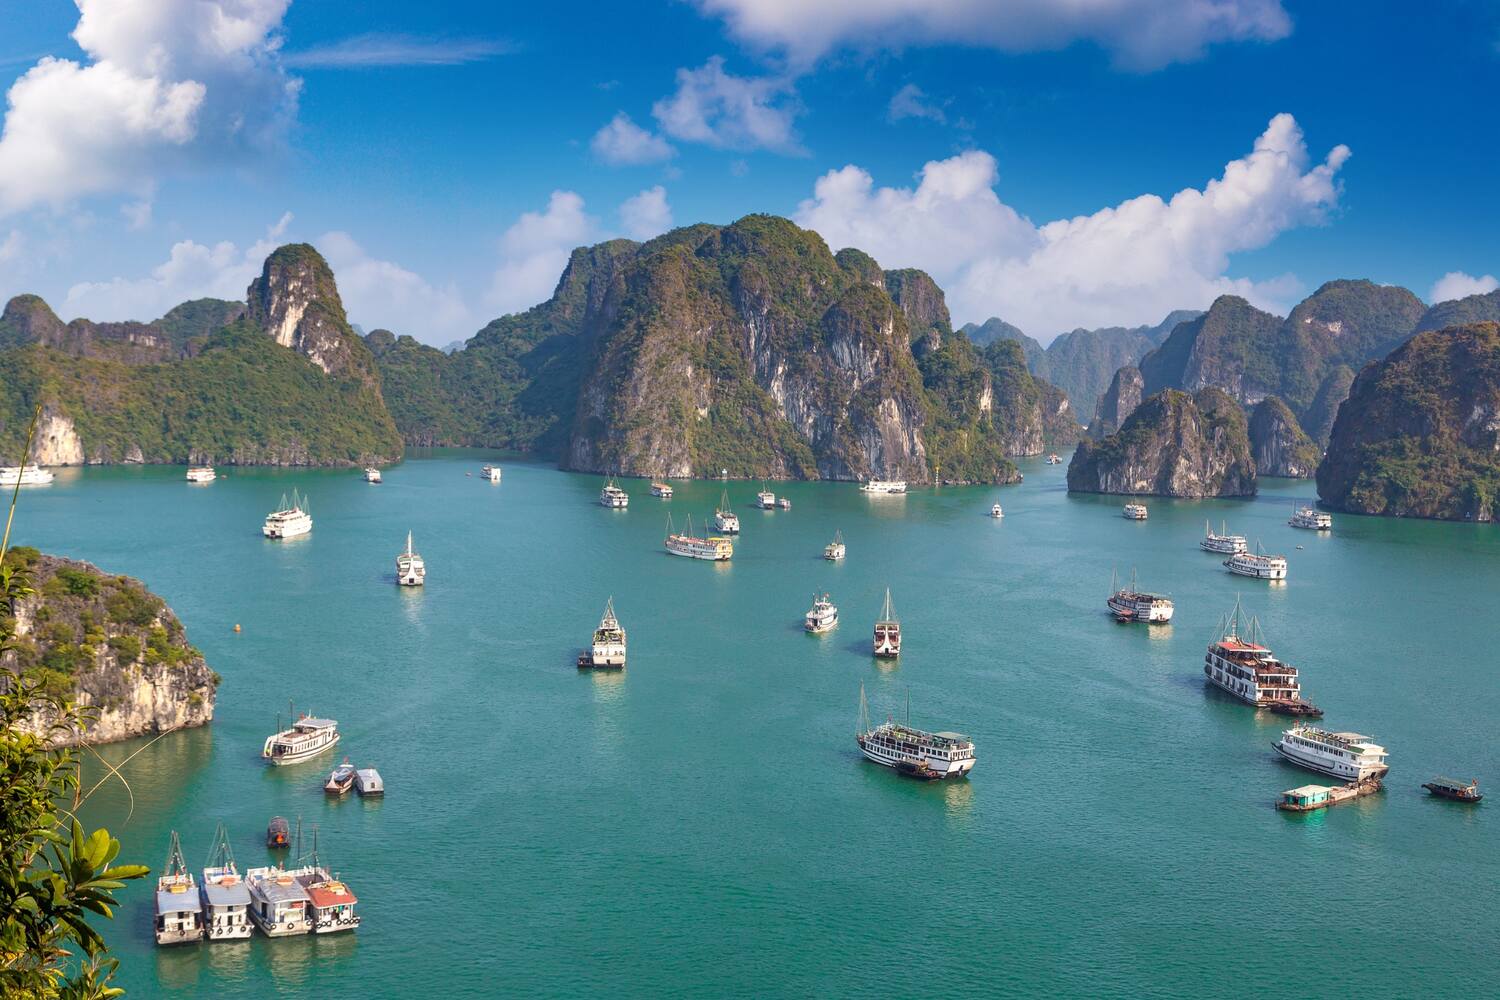 Dramatic limestone cliffs rising from emerald waters with boats anchored below.